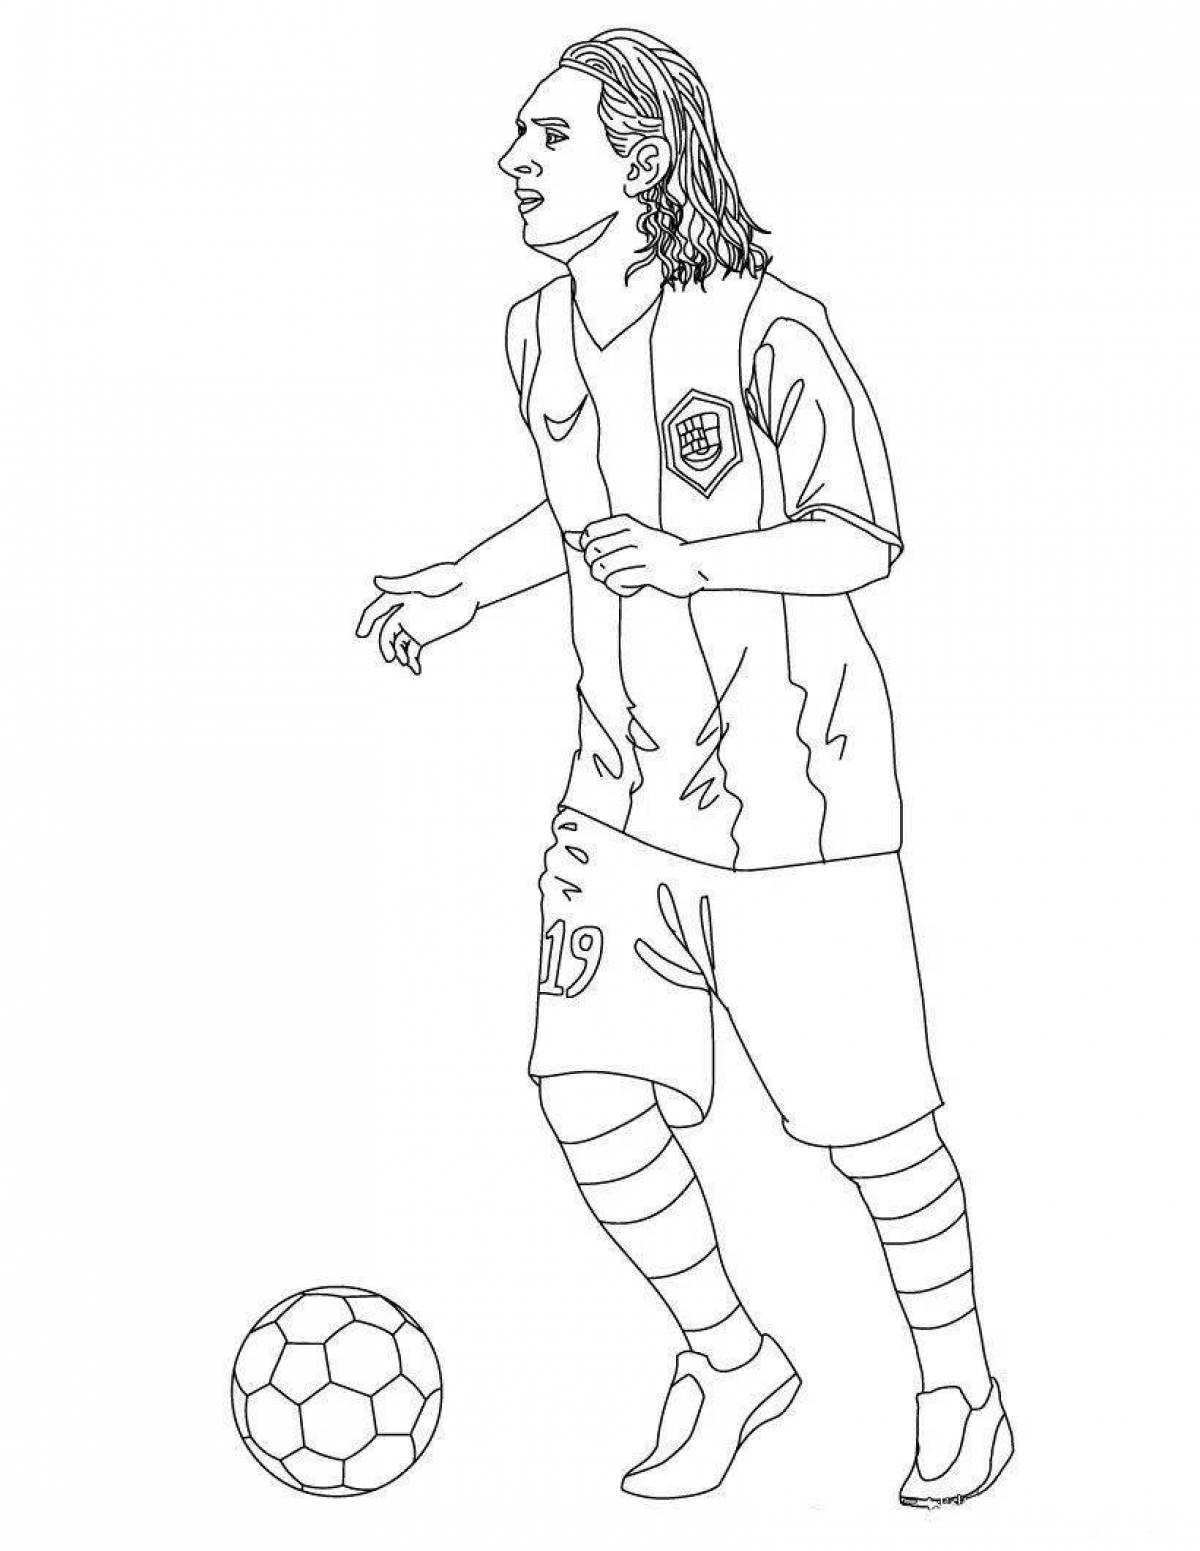 Football messi dazzling coloring book